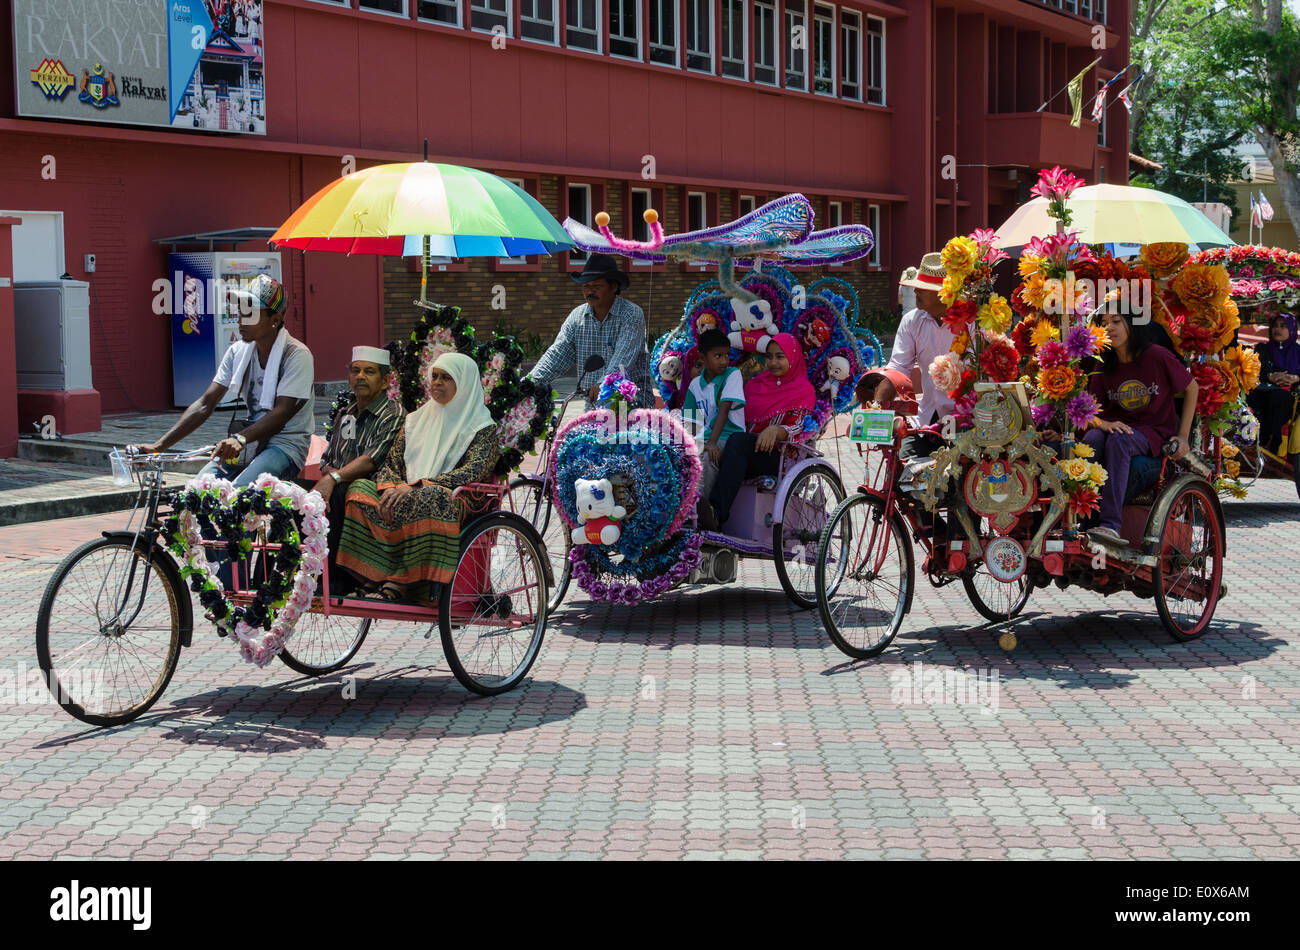 Highly decorated Trishaws in the Malaysian city of Malacca Stock Photo